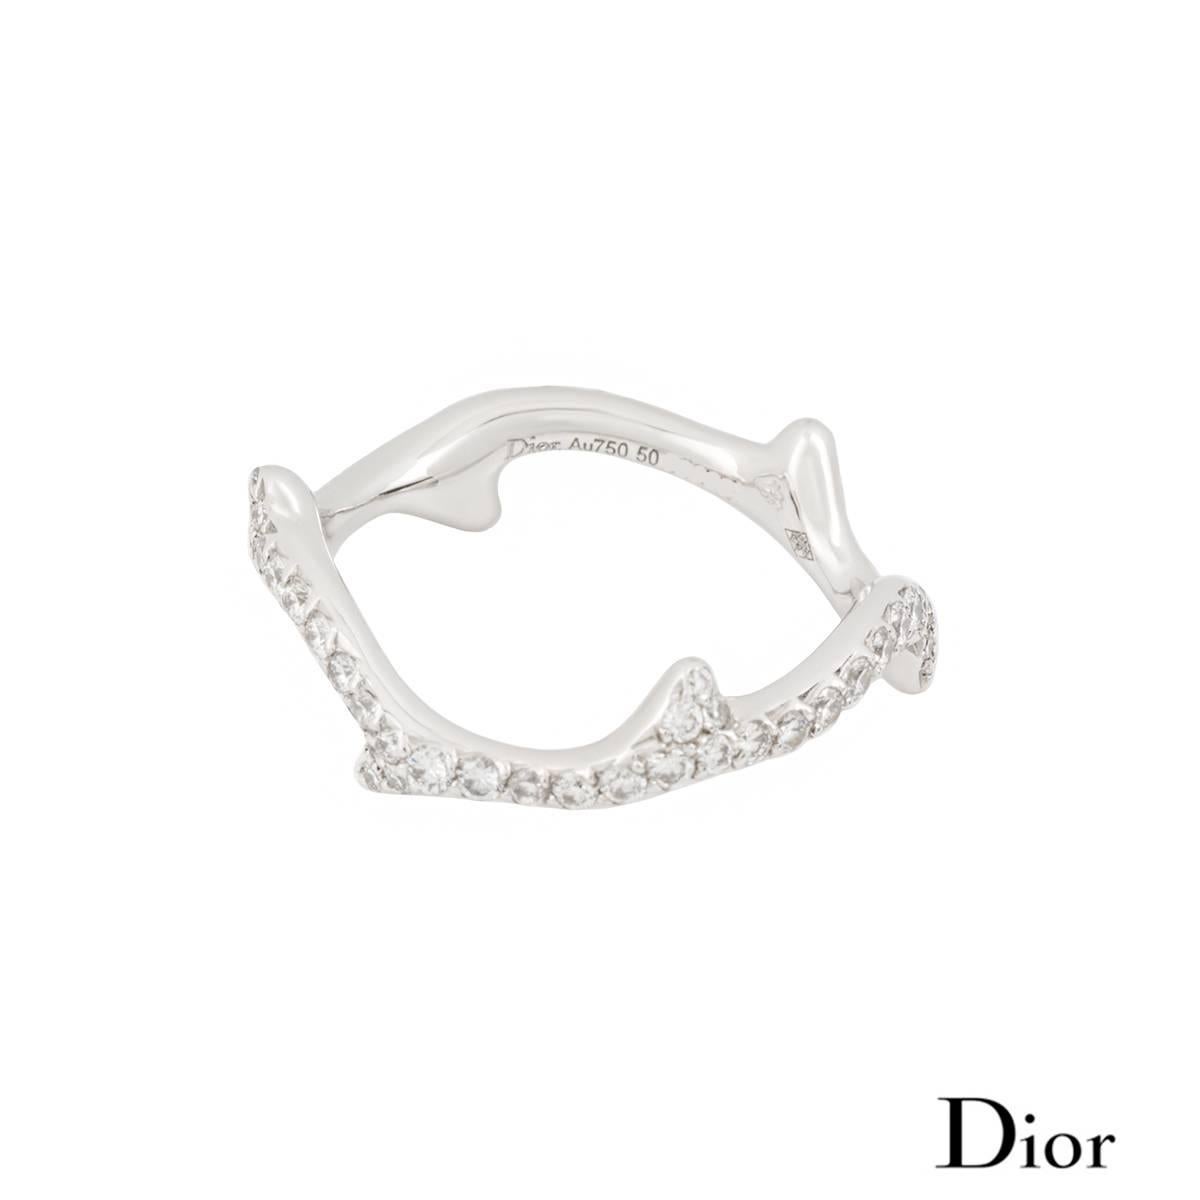 An 18k white gold diamond set Bois de Rose ring by Dior. The ring is of a rose stem design, pave set with round brilliant cut diamond totalling approximately 0.58ct. The ring measures 1.5cm in width and is a US size 5 1/2, EU size 50 and UK size K